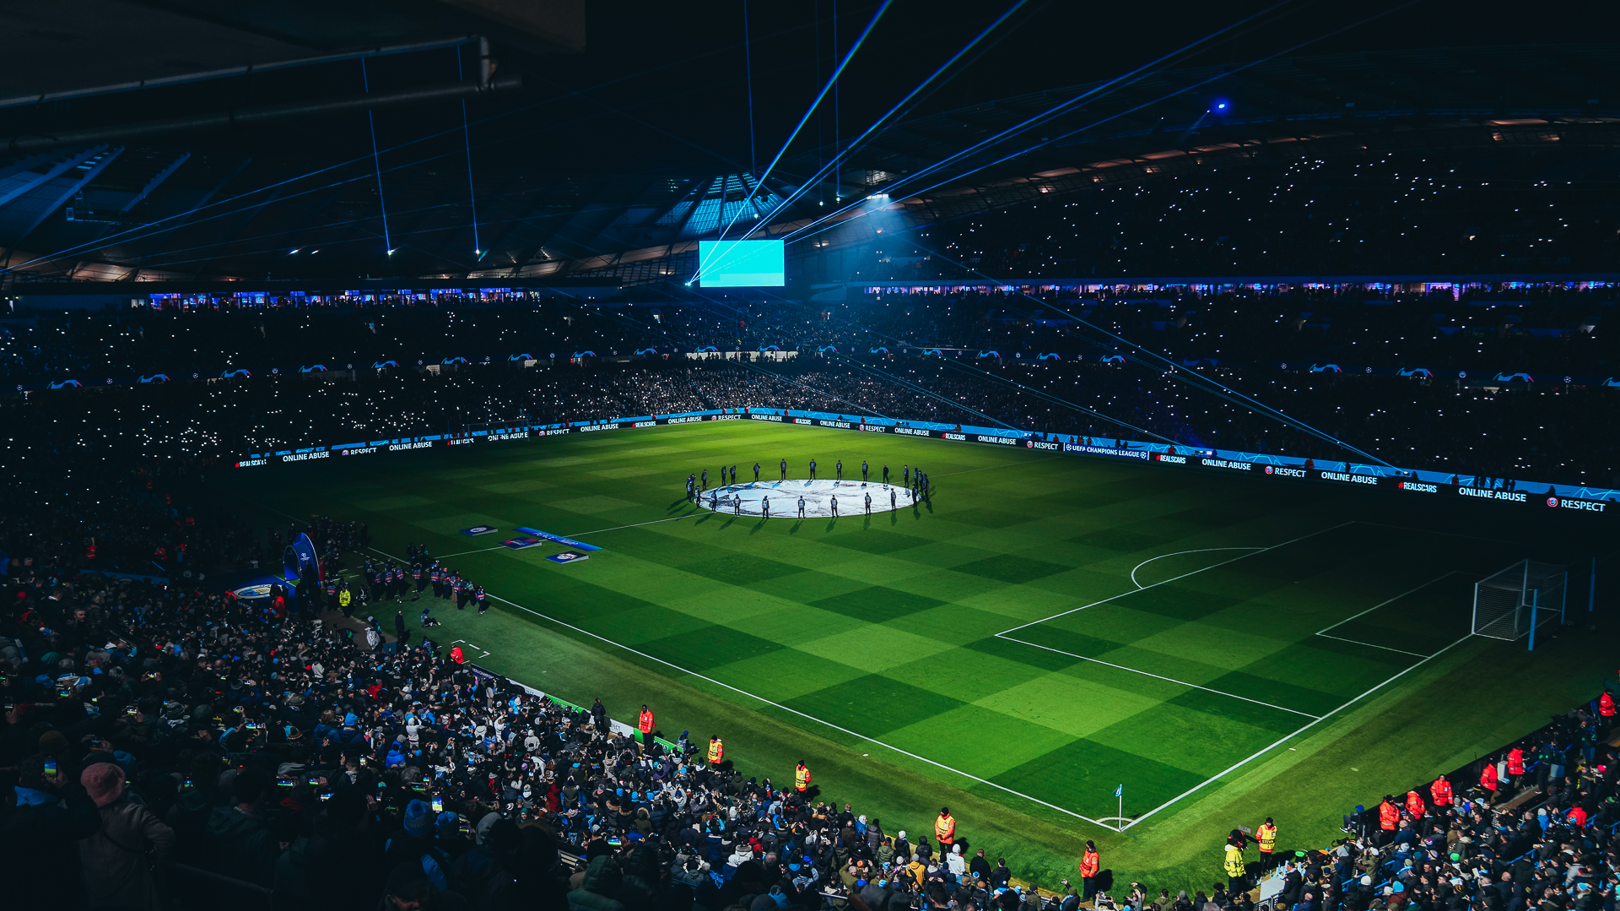 A Champions League match preparing to kickoff.